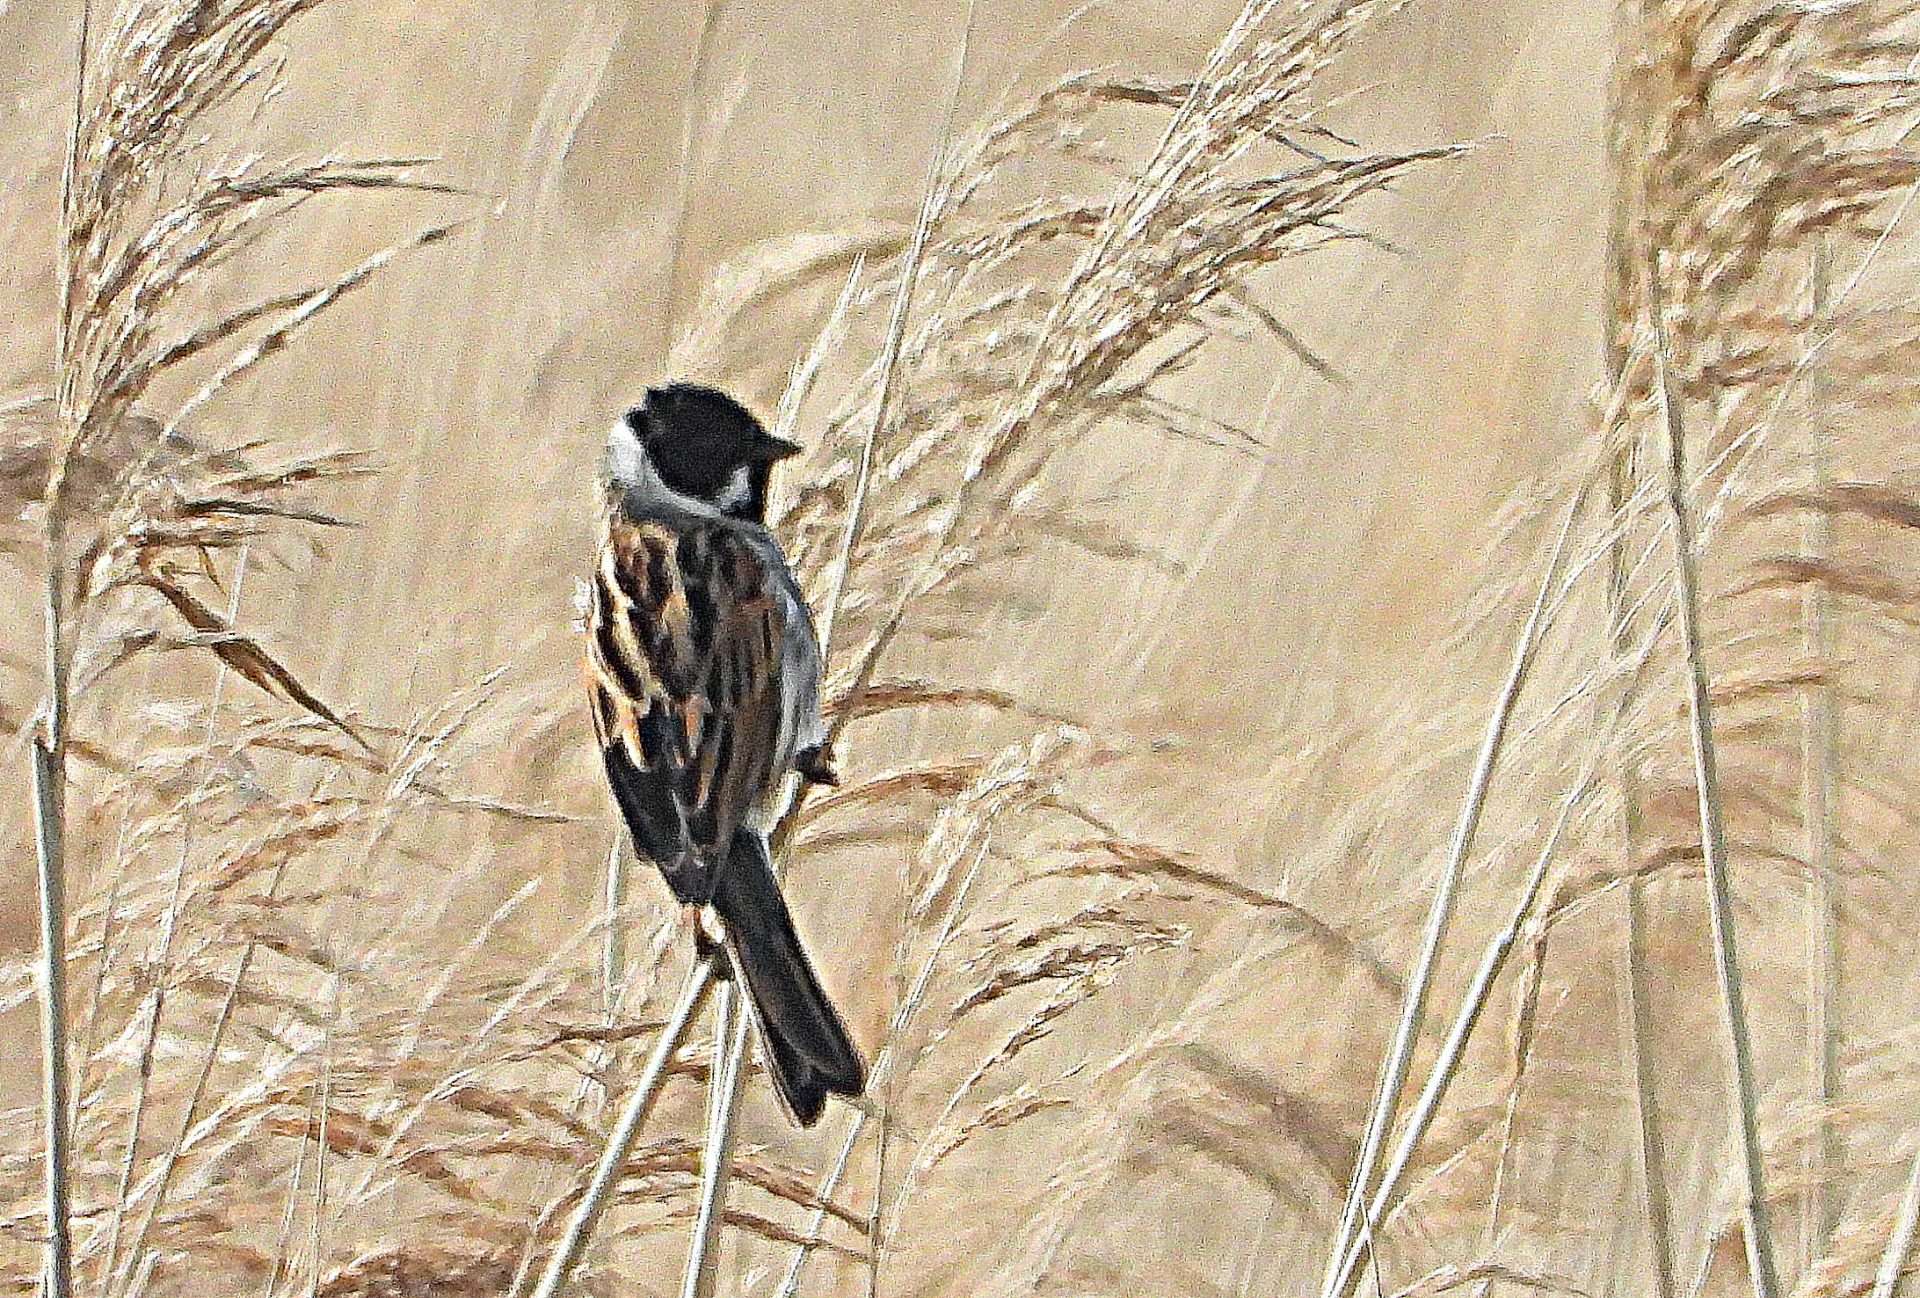 Reed Bunting by Kenneth at Combe cellars